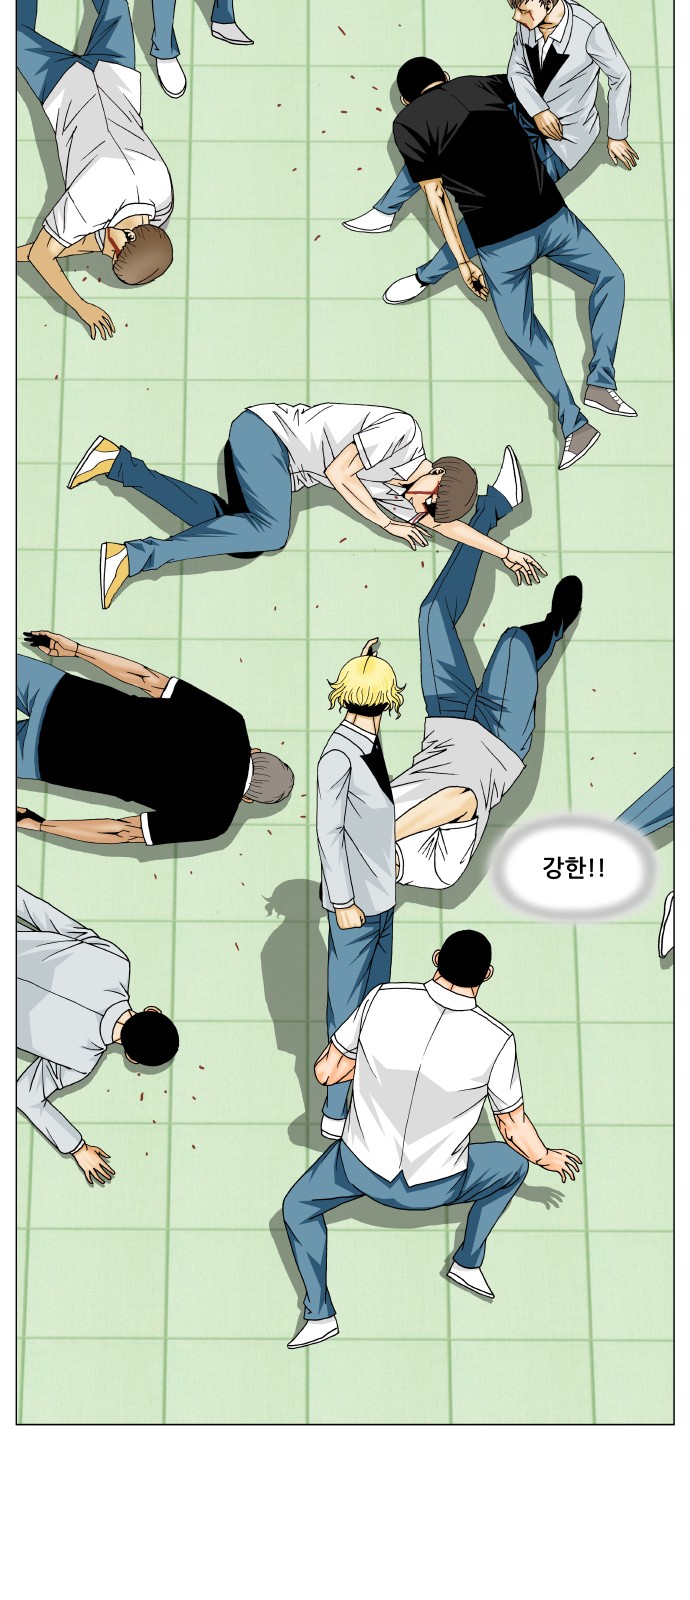 Ultimate Legend - Kang Hae Hyo - Chapter 370 - Page 5